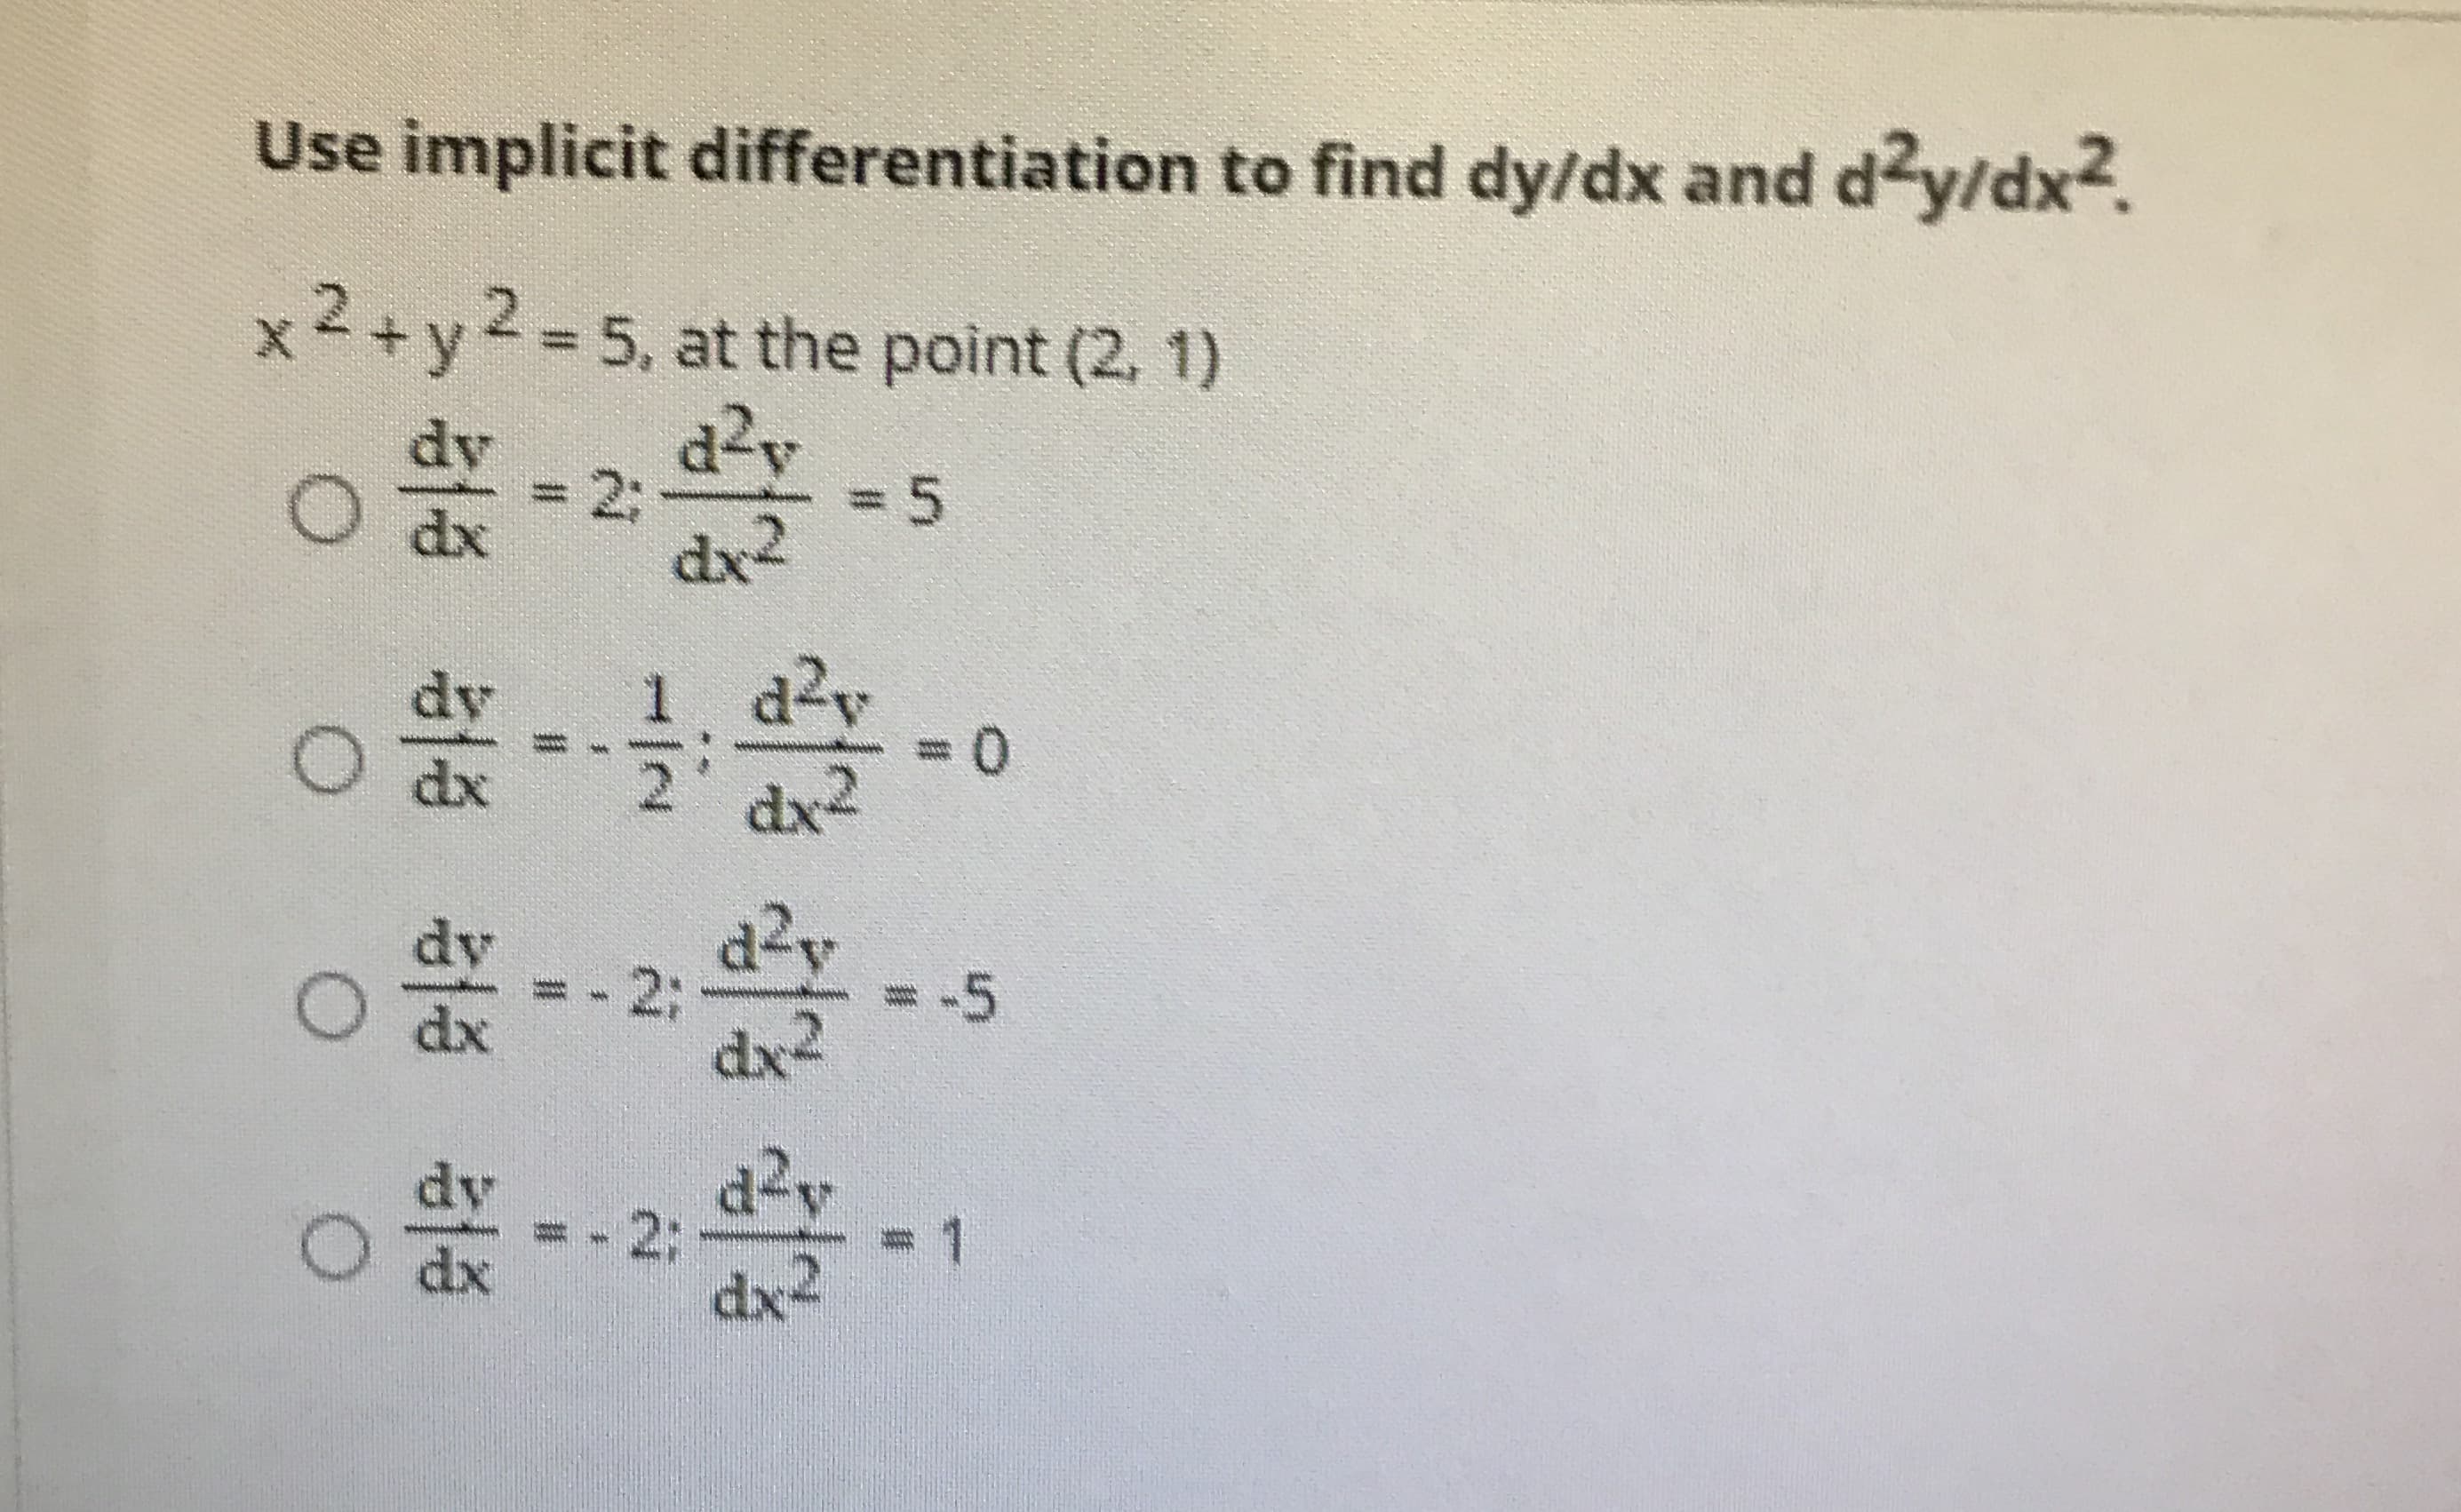 Use implicit differentiation to find dy/dx and dy/dx2.
x²+y2%D5, at the point (2, 1)
dv
d2v
=D2B
3D5
dx
dx2
1 d2v
3D0
dv
O dx
dx2
d2v
2B
dx2
dv
O dx
d2v
= - 2:
dx2
dv
dx
